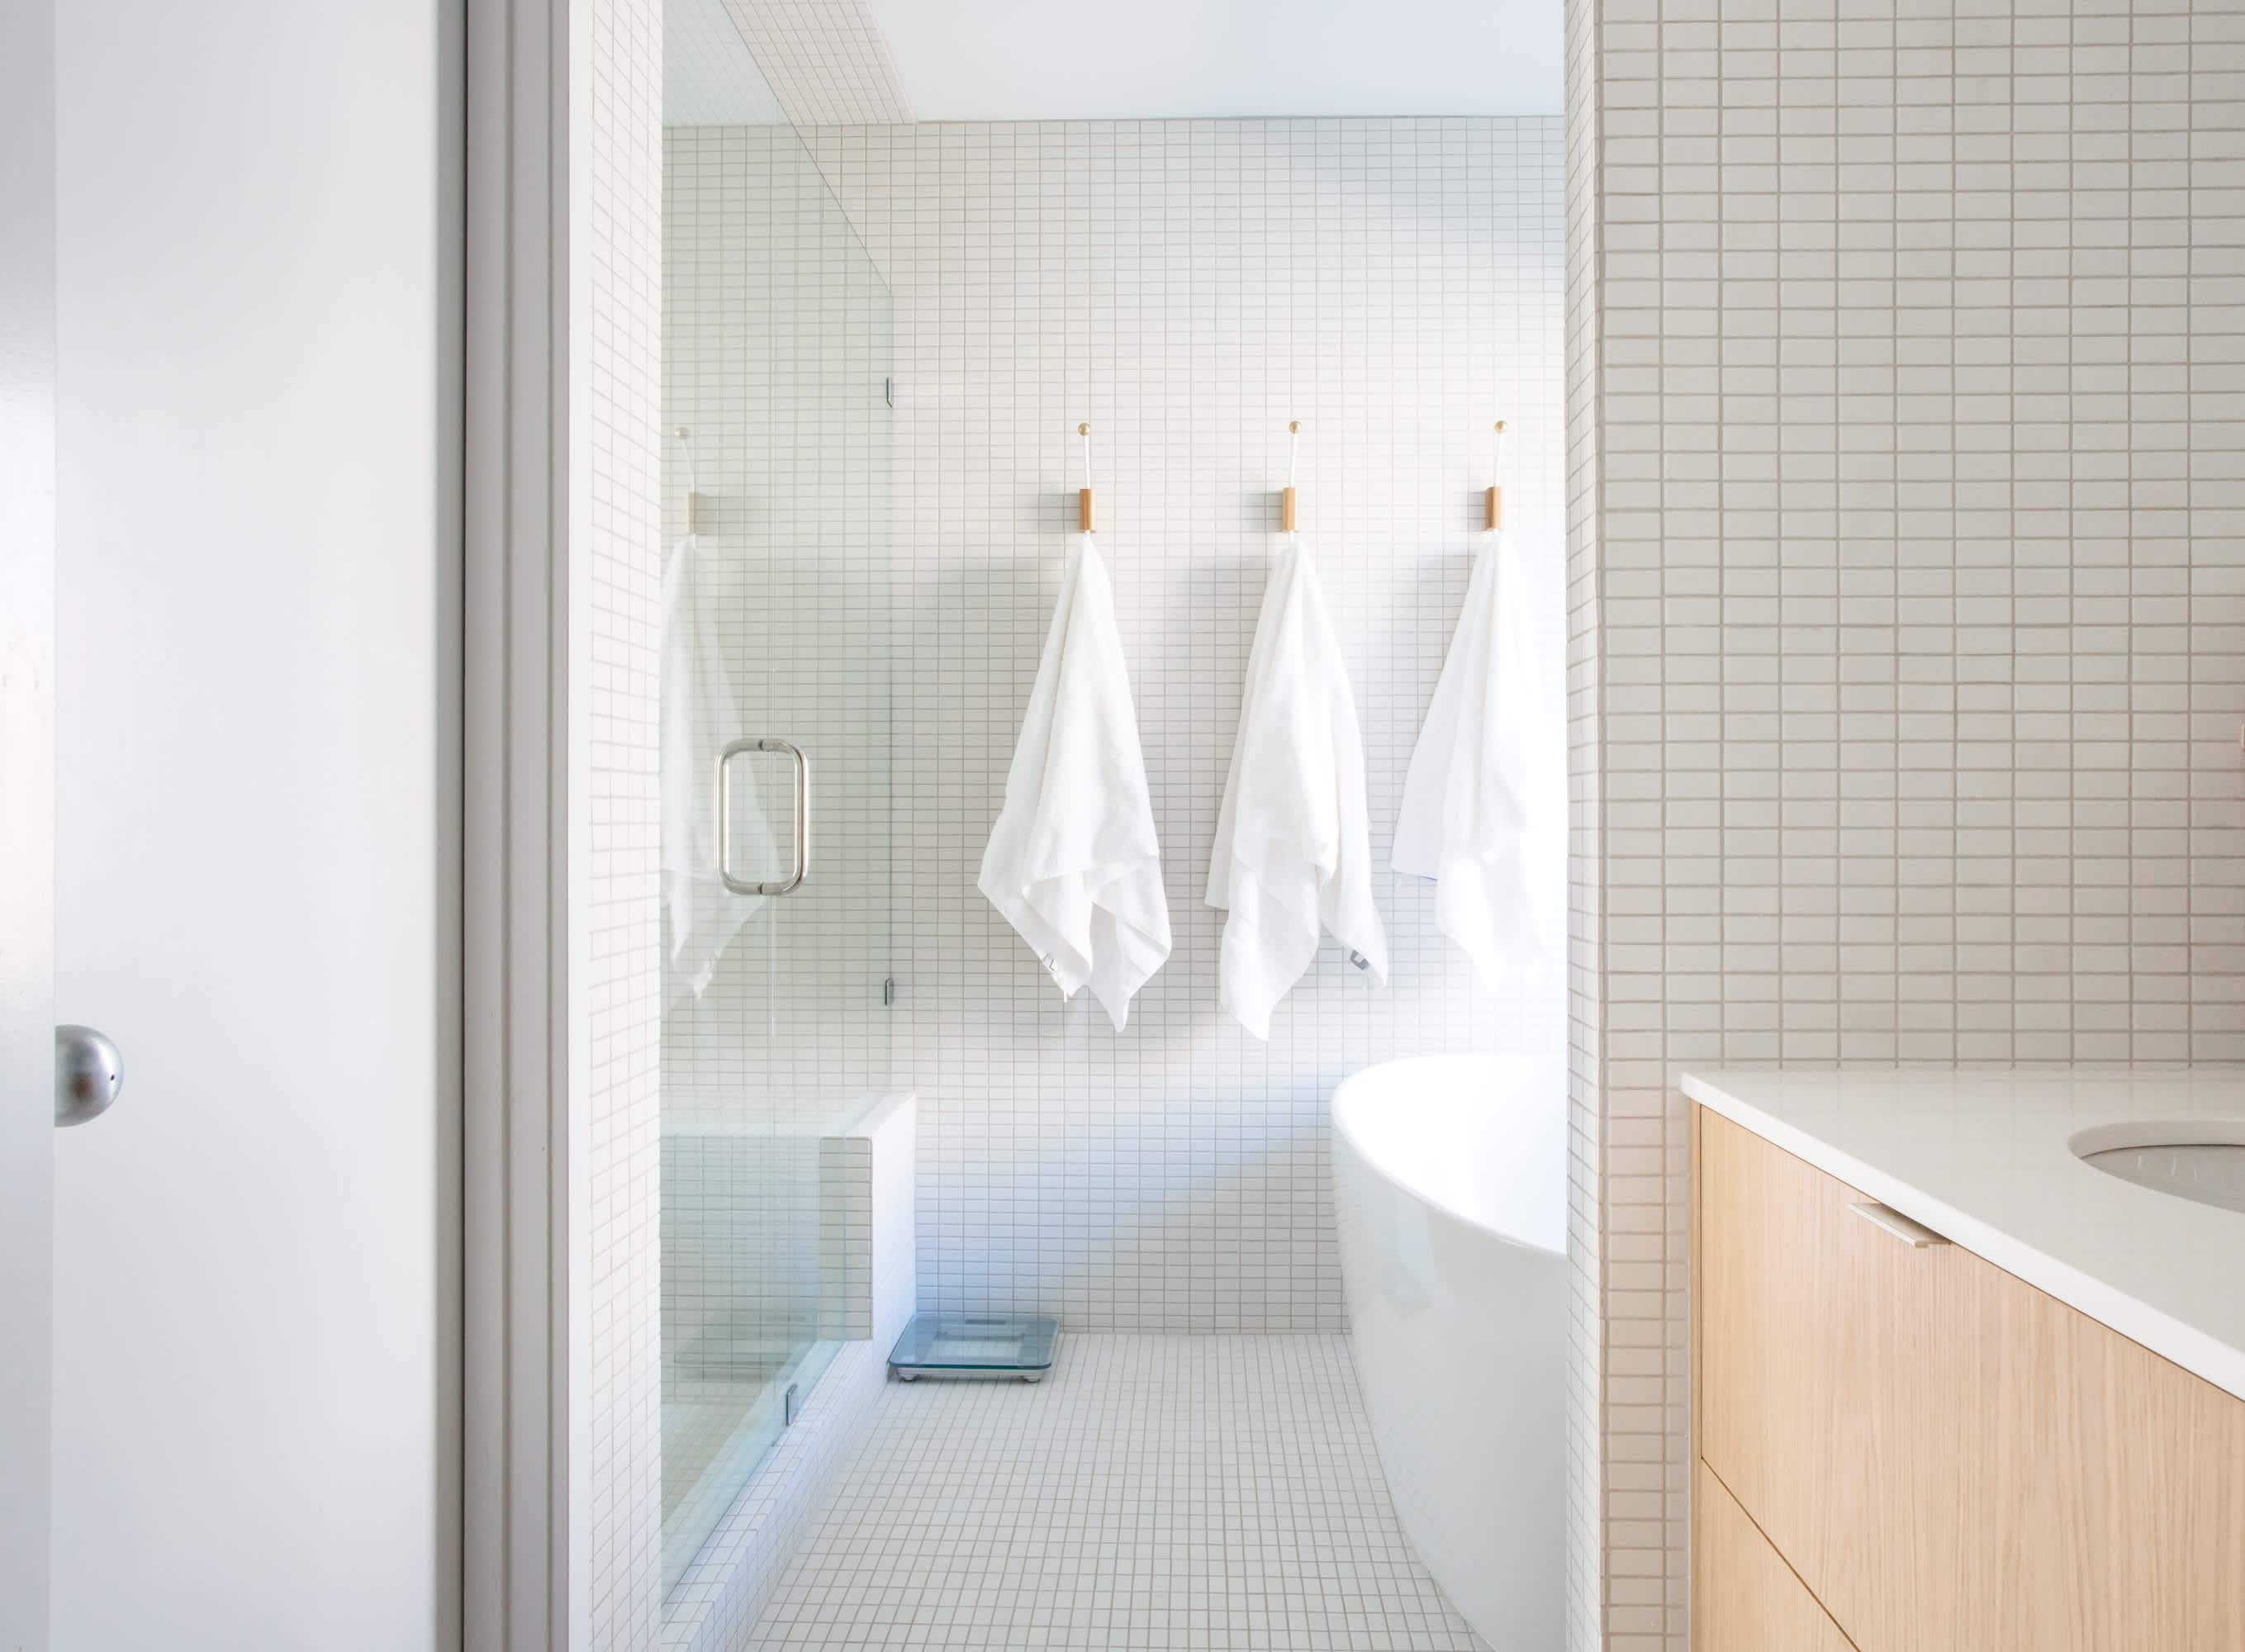 Hotel Bath Towels: Your Key to a Five-Star Bathroom Experience